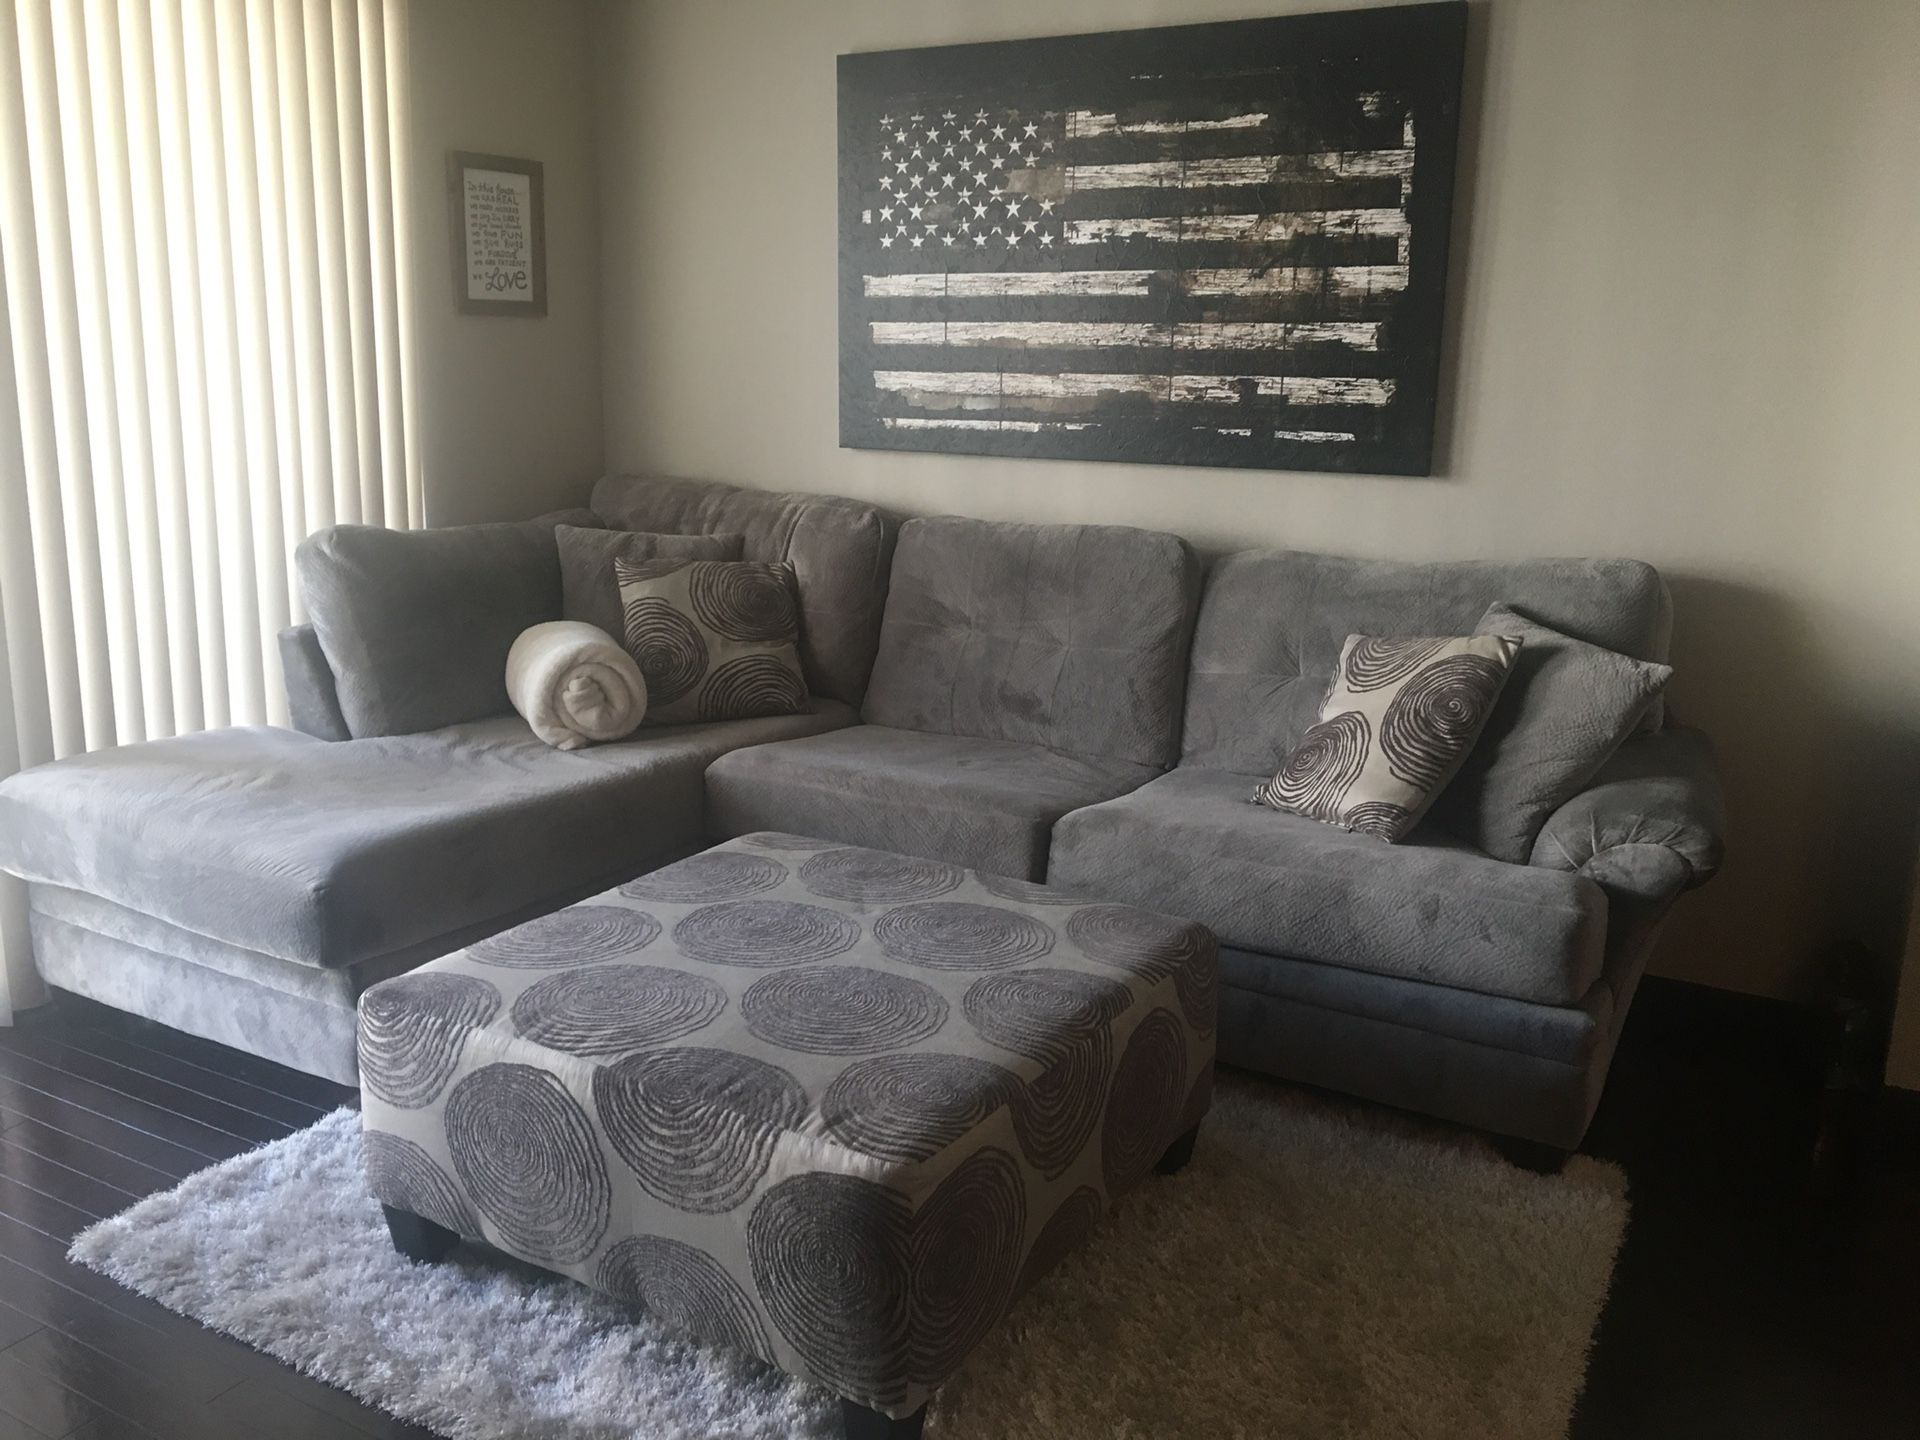 Charcoal grey plush sectional couch